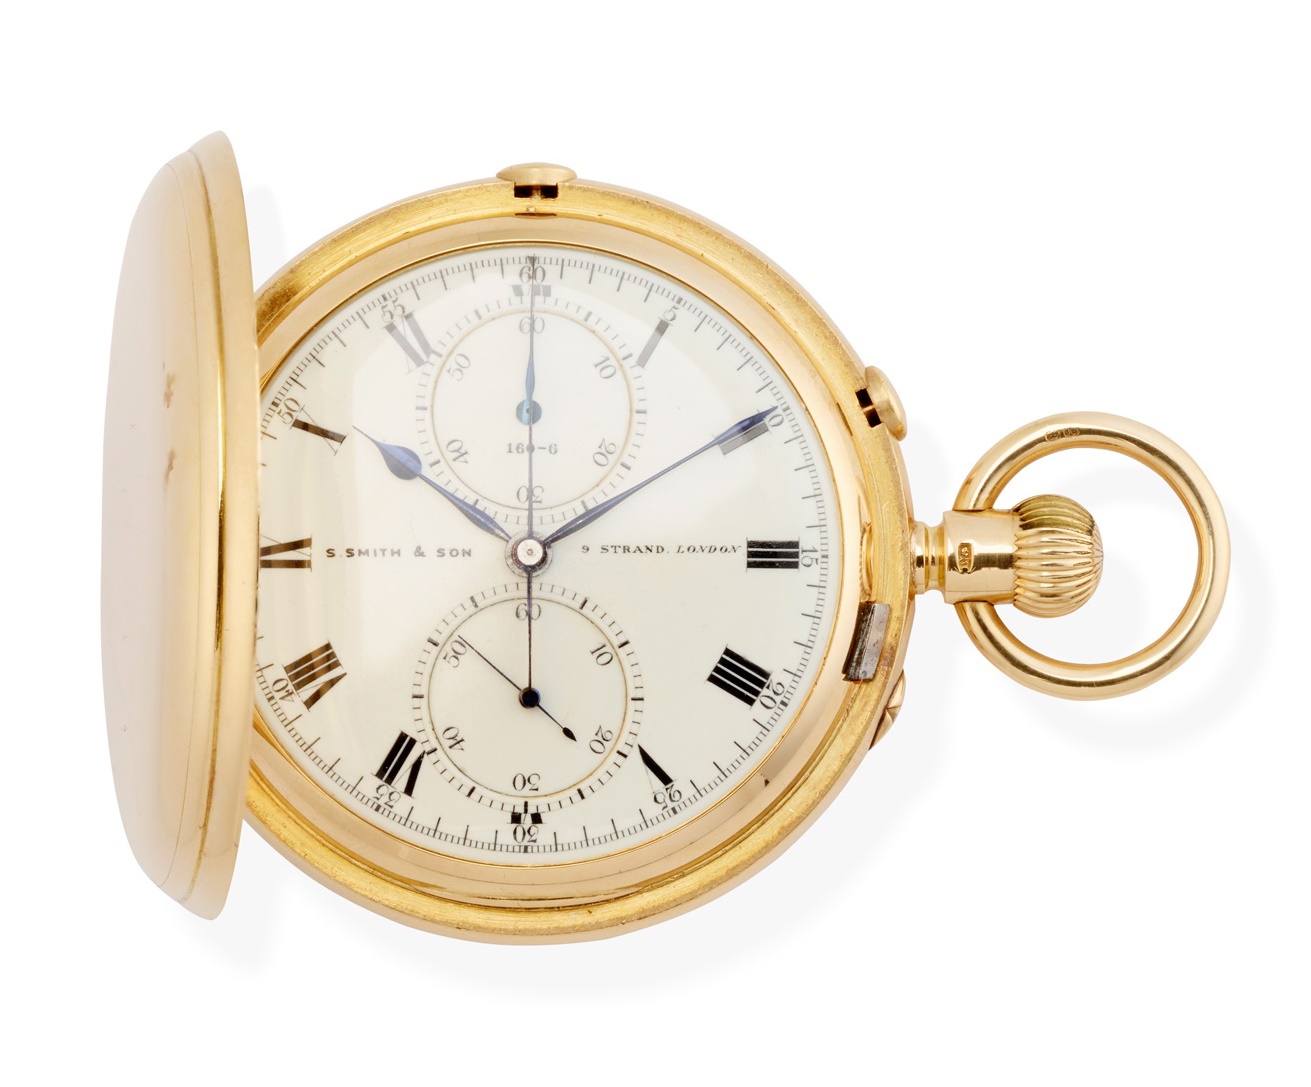 S. Smith & Son: an 18ct gold pocket watch | £1,400 - £1,800 + fees